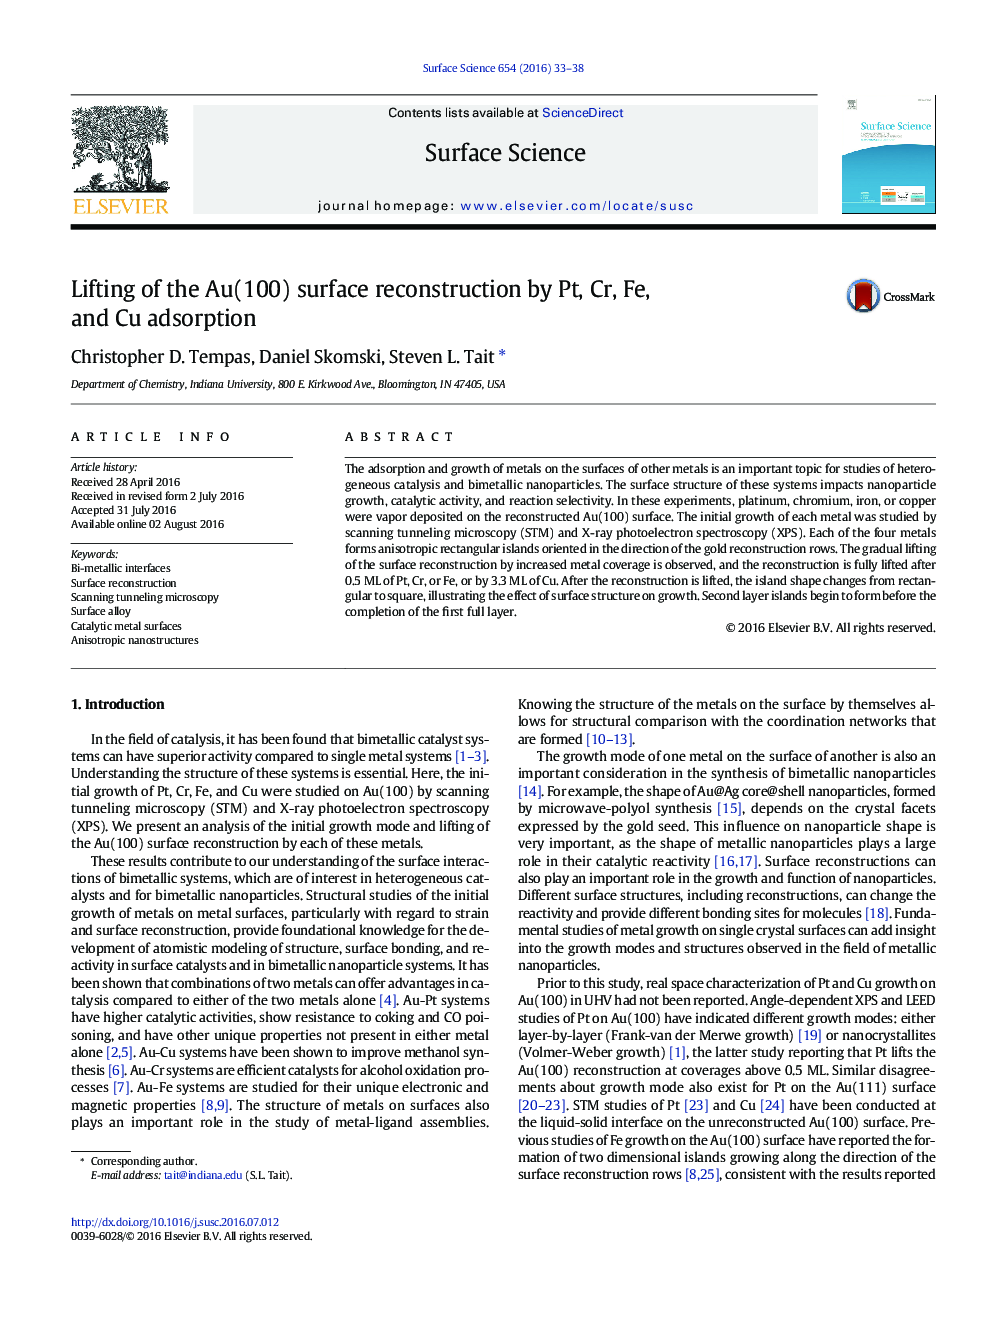 Lifting of the Au(100) surface reconstruction by Pt, Cr, Fe, and Cu adsorption